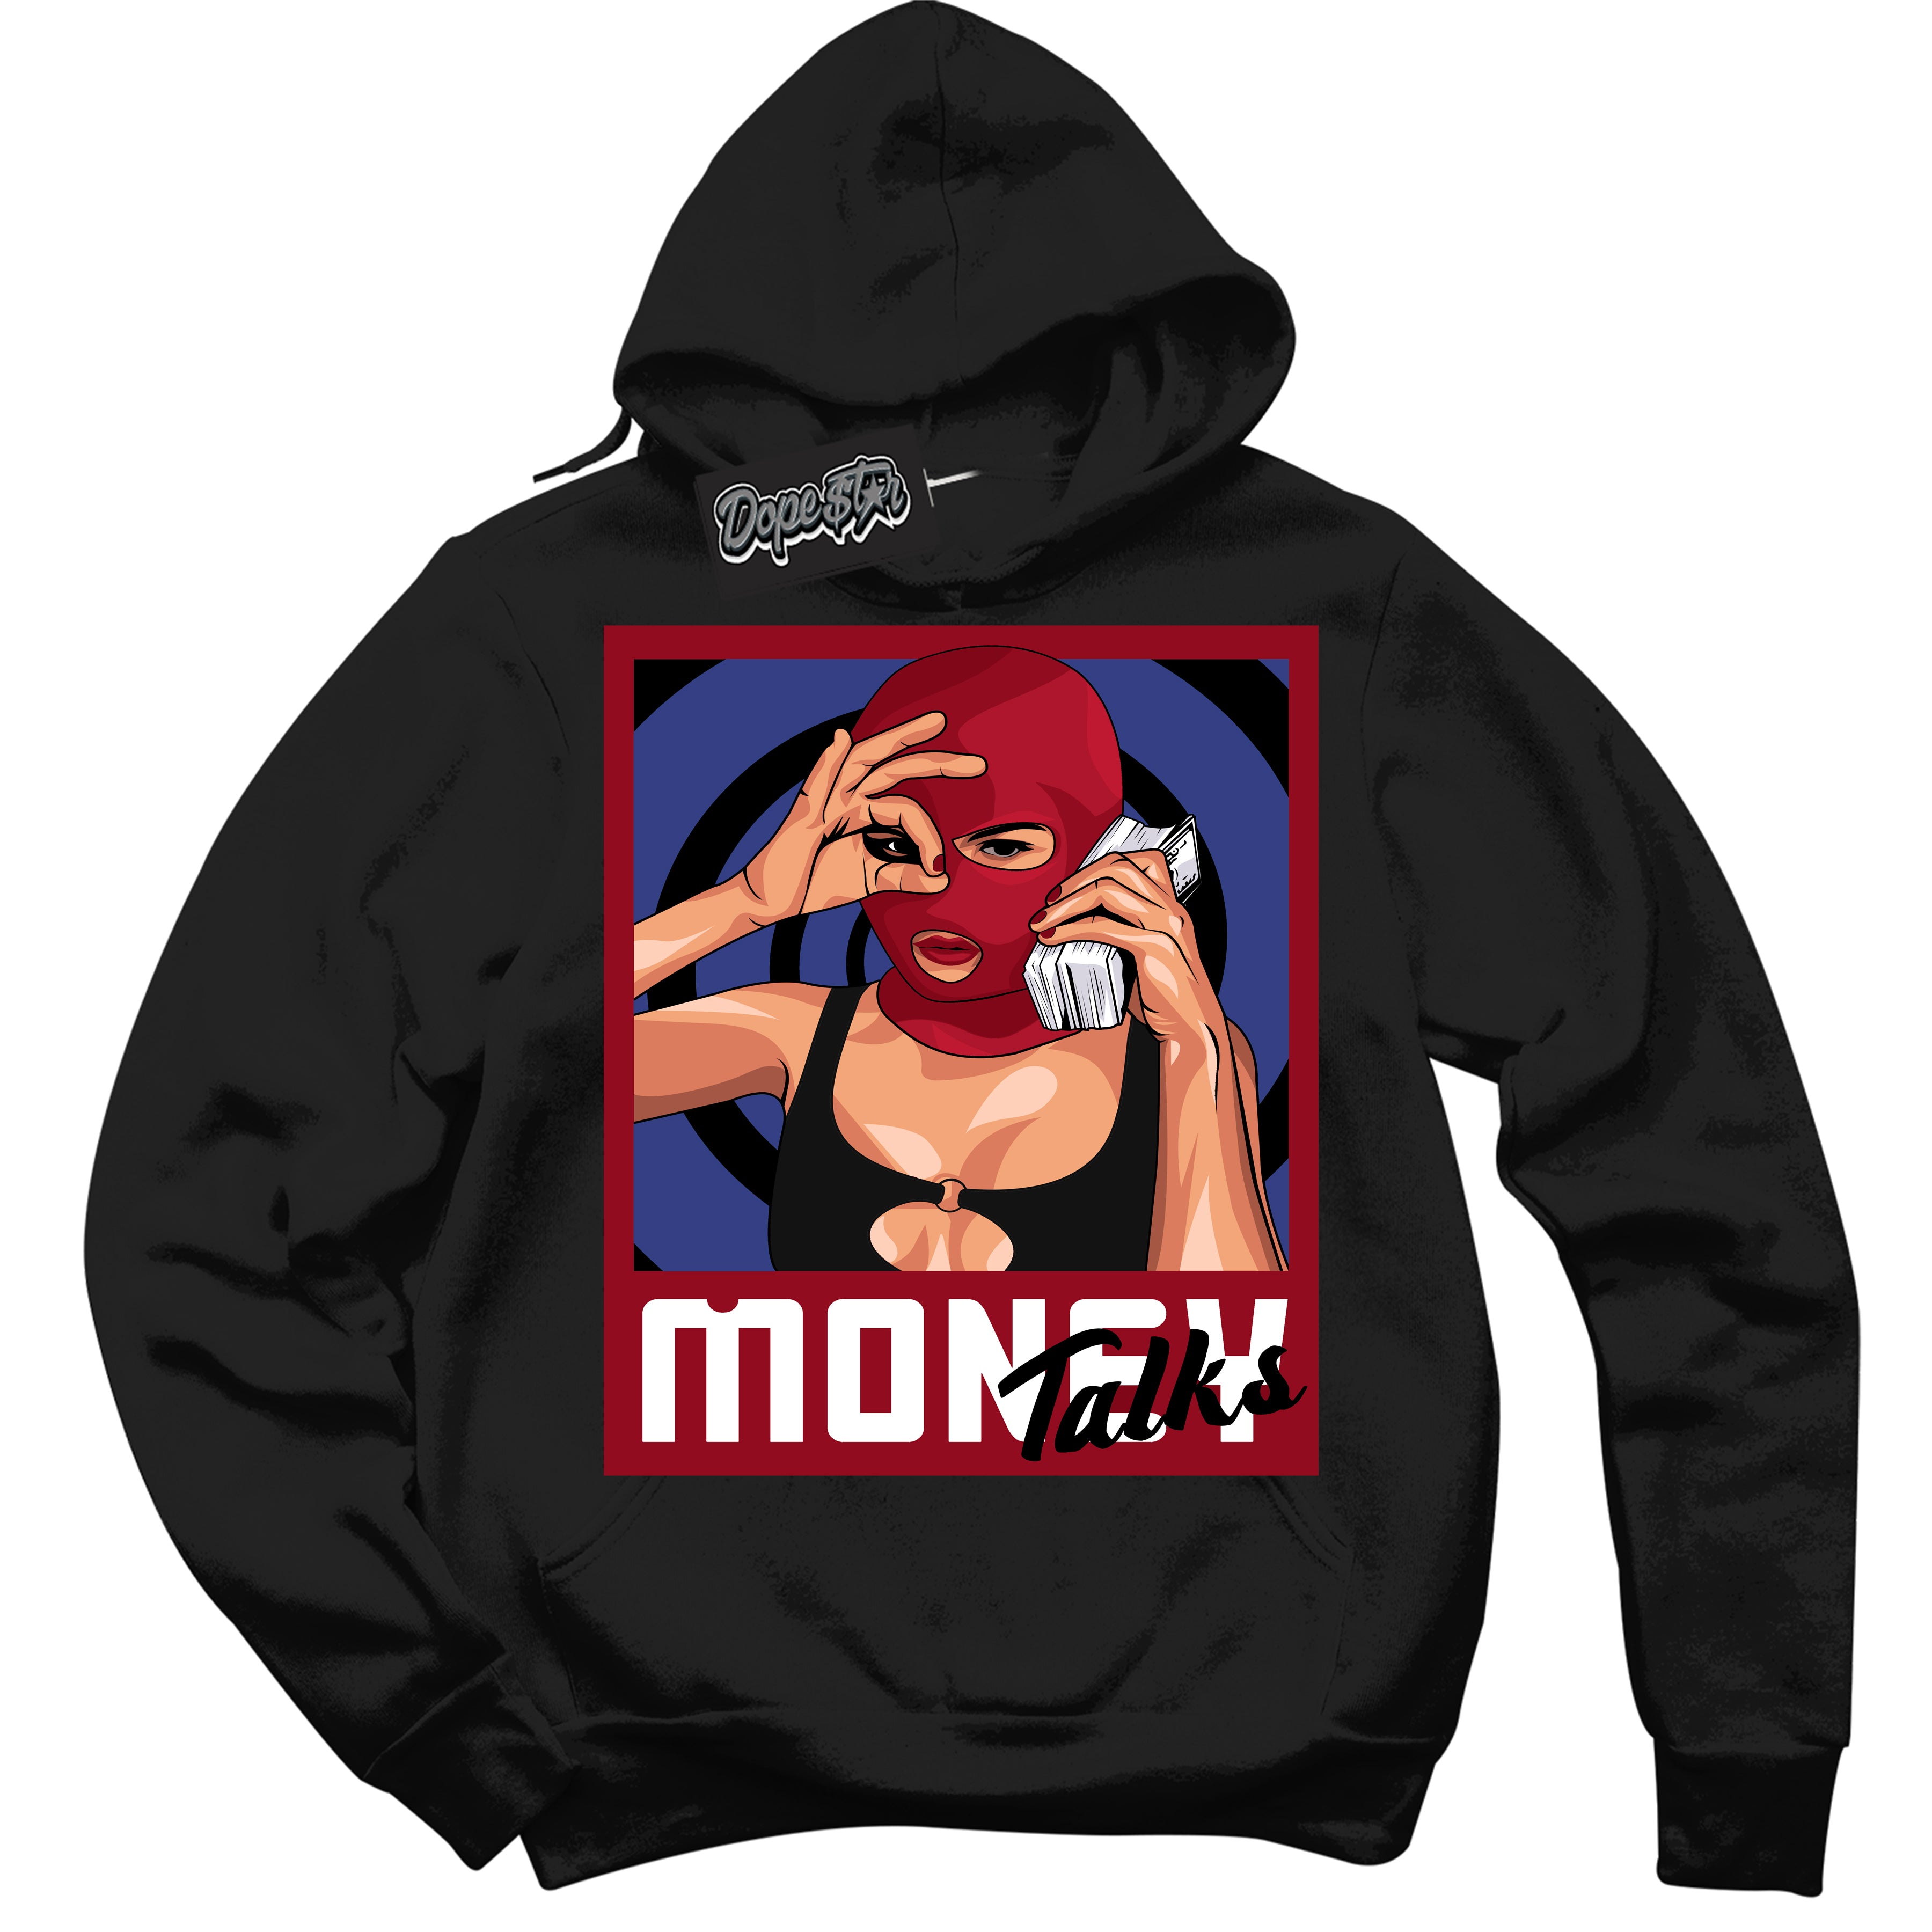 Cool Black Hoodie with “ Money Talks ”  design that Perfectly Matches Playoffs 8s Sneakers.